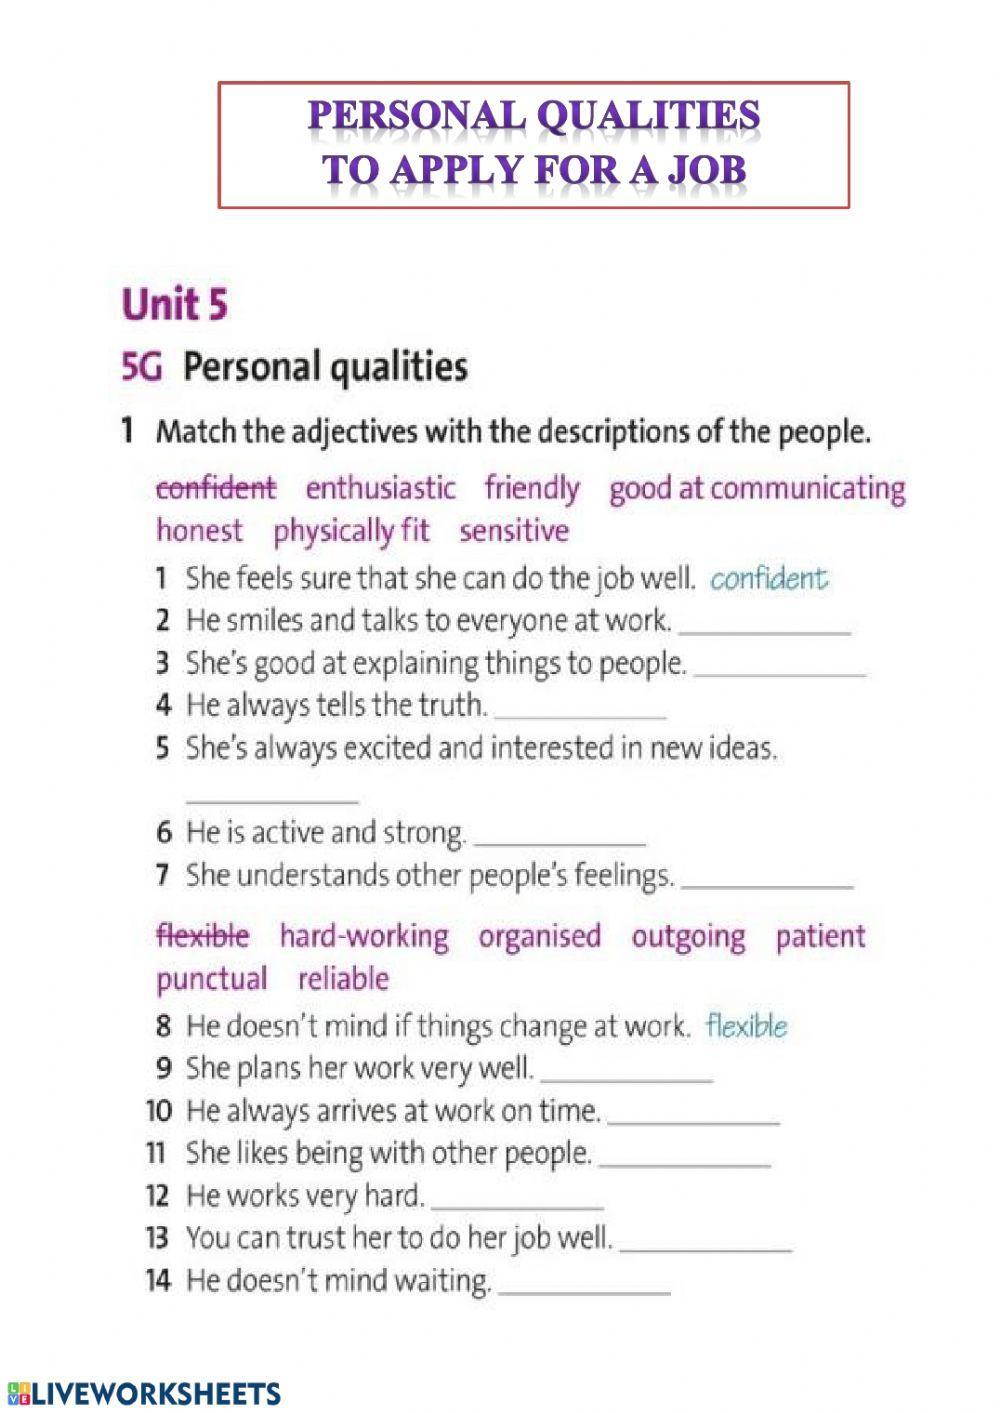 Personal Qualities